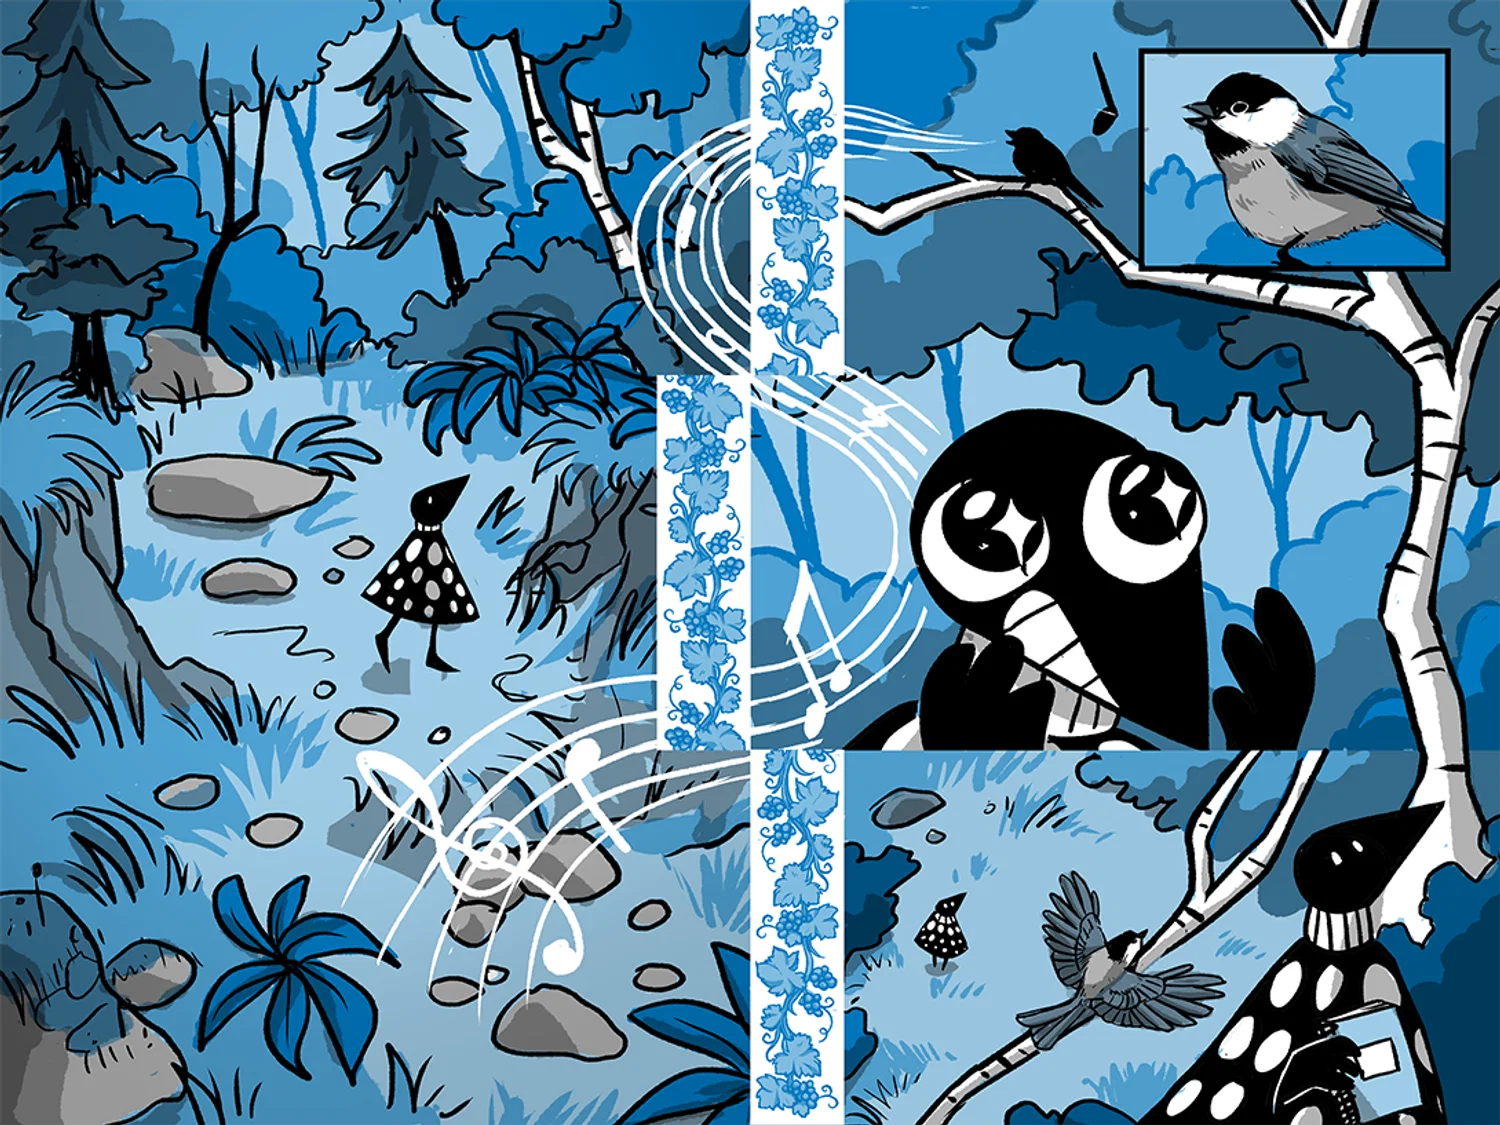 A comic pagespread rendered in shades of blue and grey showing an anthropomorphic loon character exploring a dense woodland and encountering a white-capped chickadee.